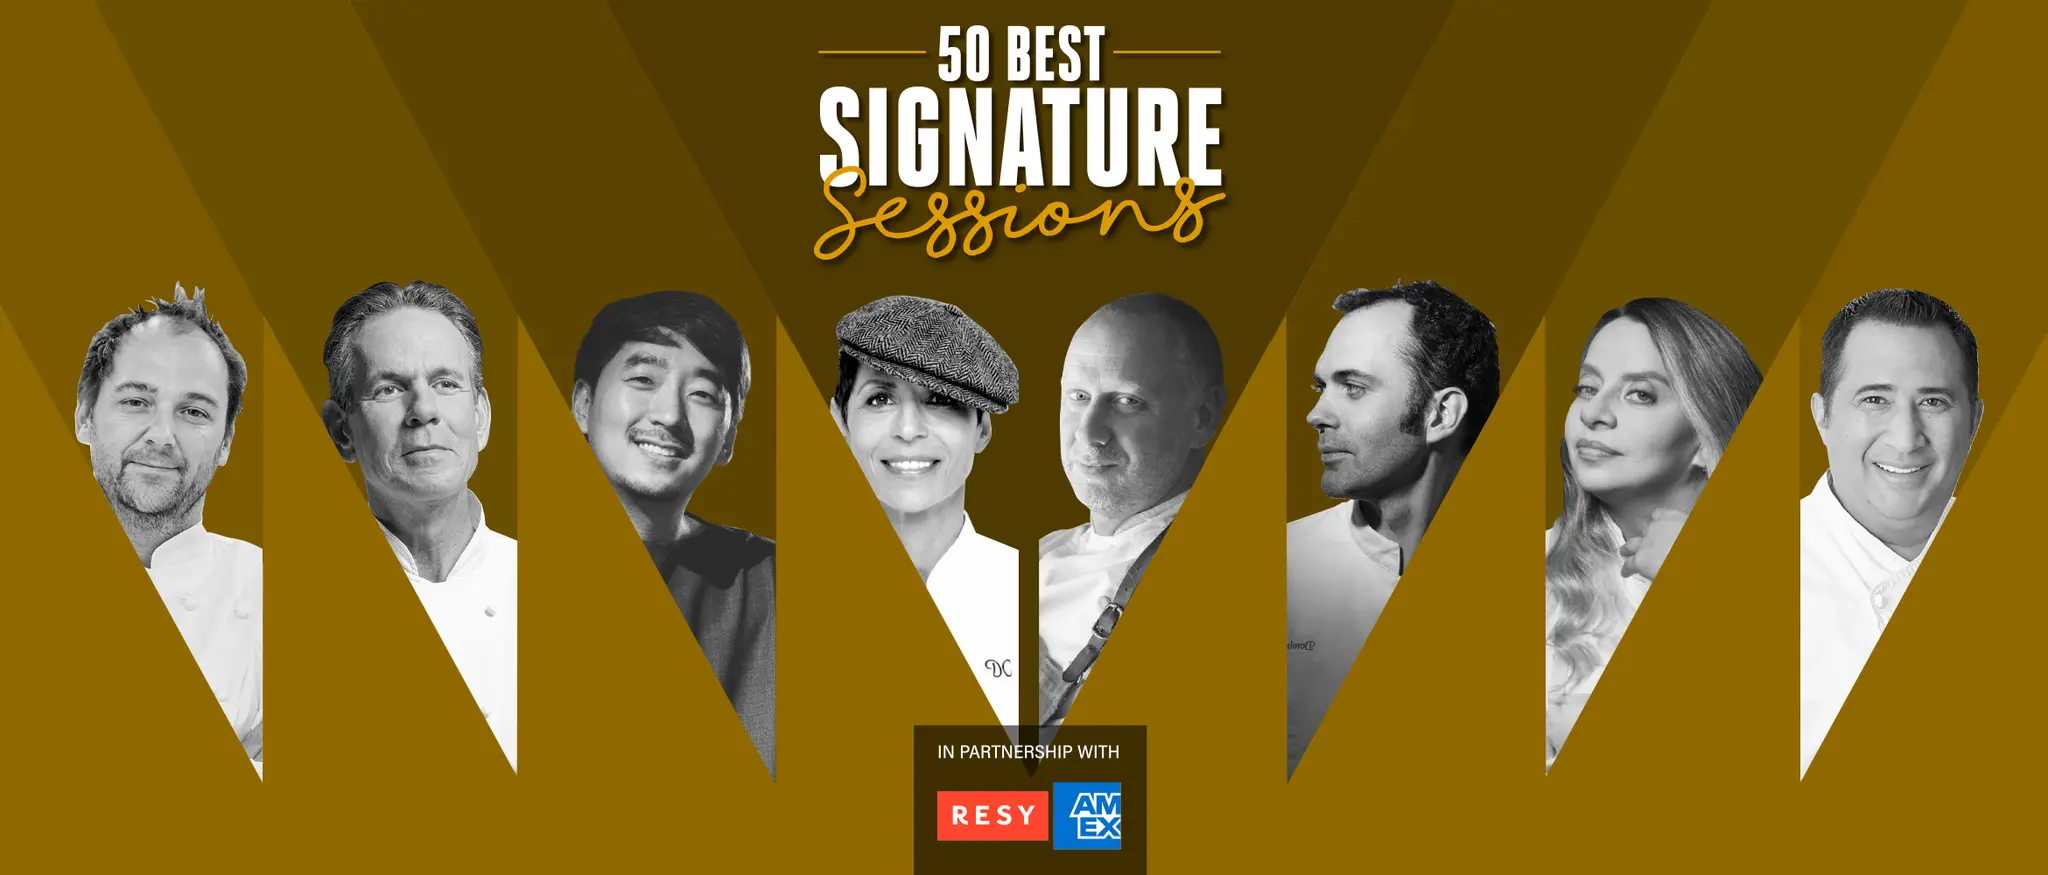 50 Best Signature Session: Icons Dinner